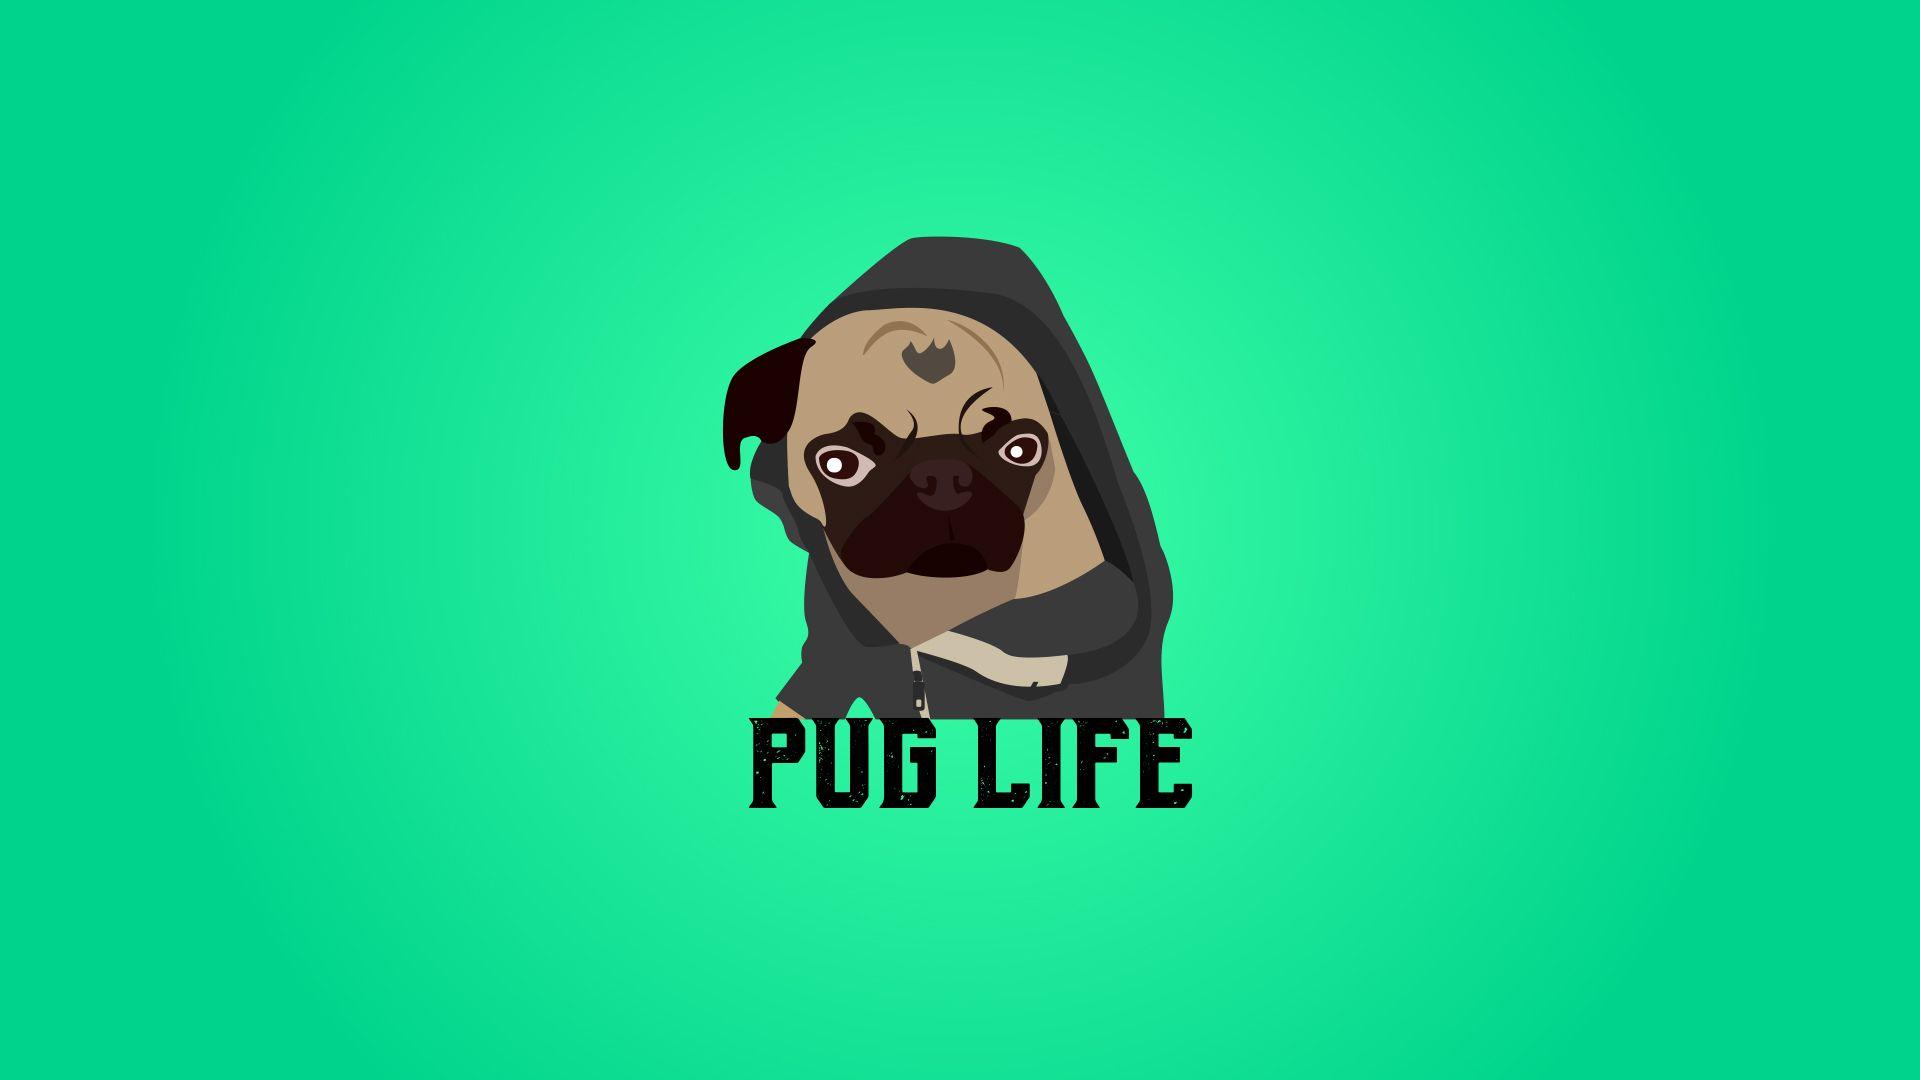 Pug Life (1920 x 1080) me for different resolutions